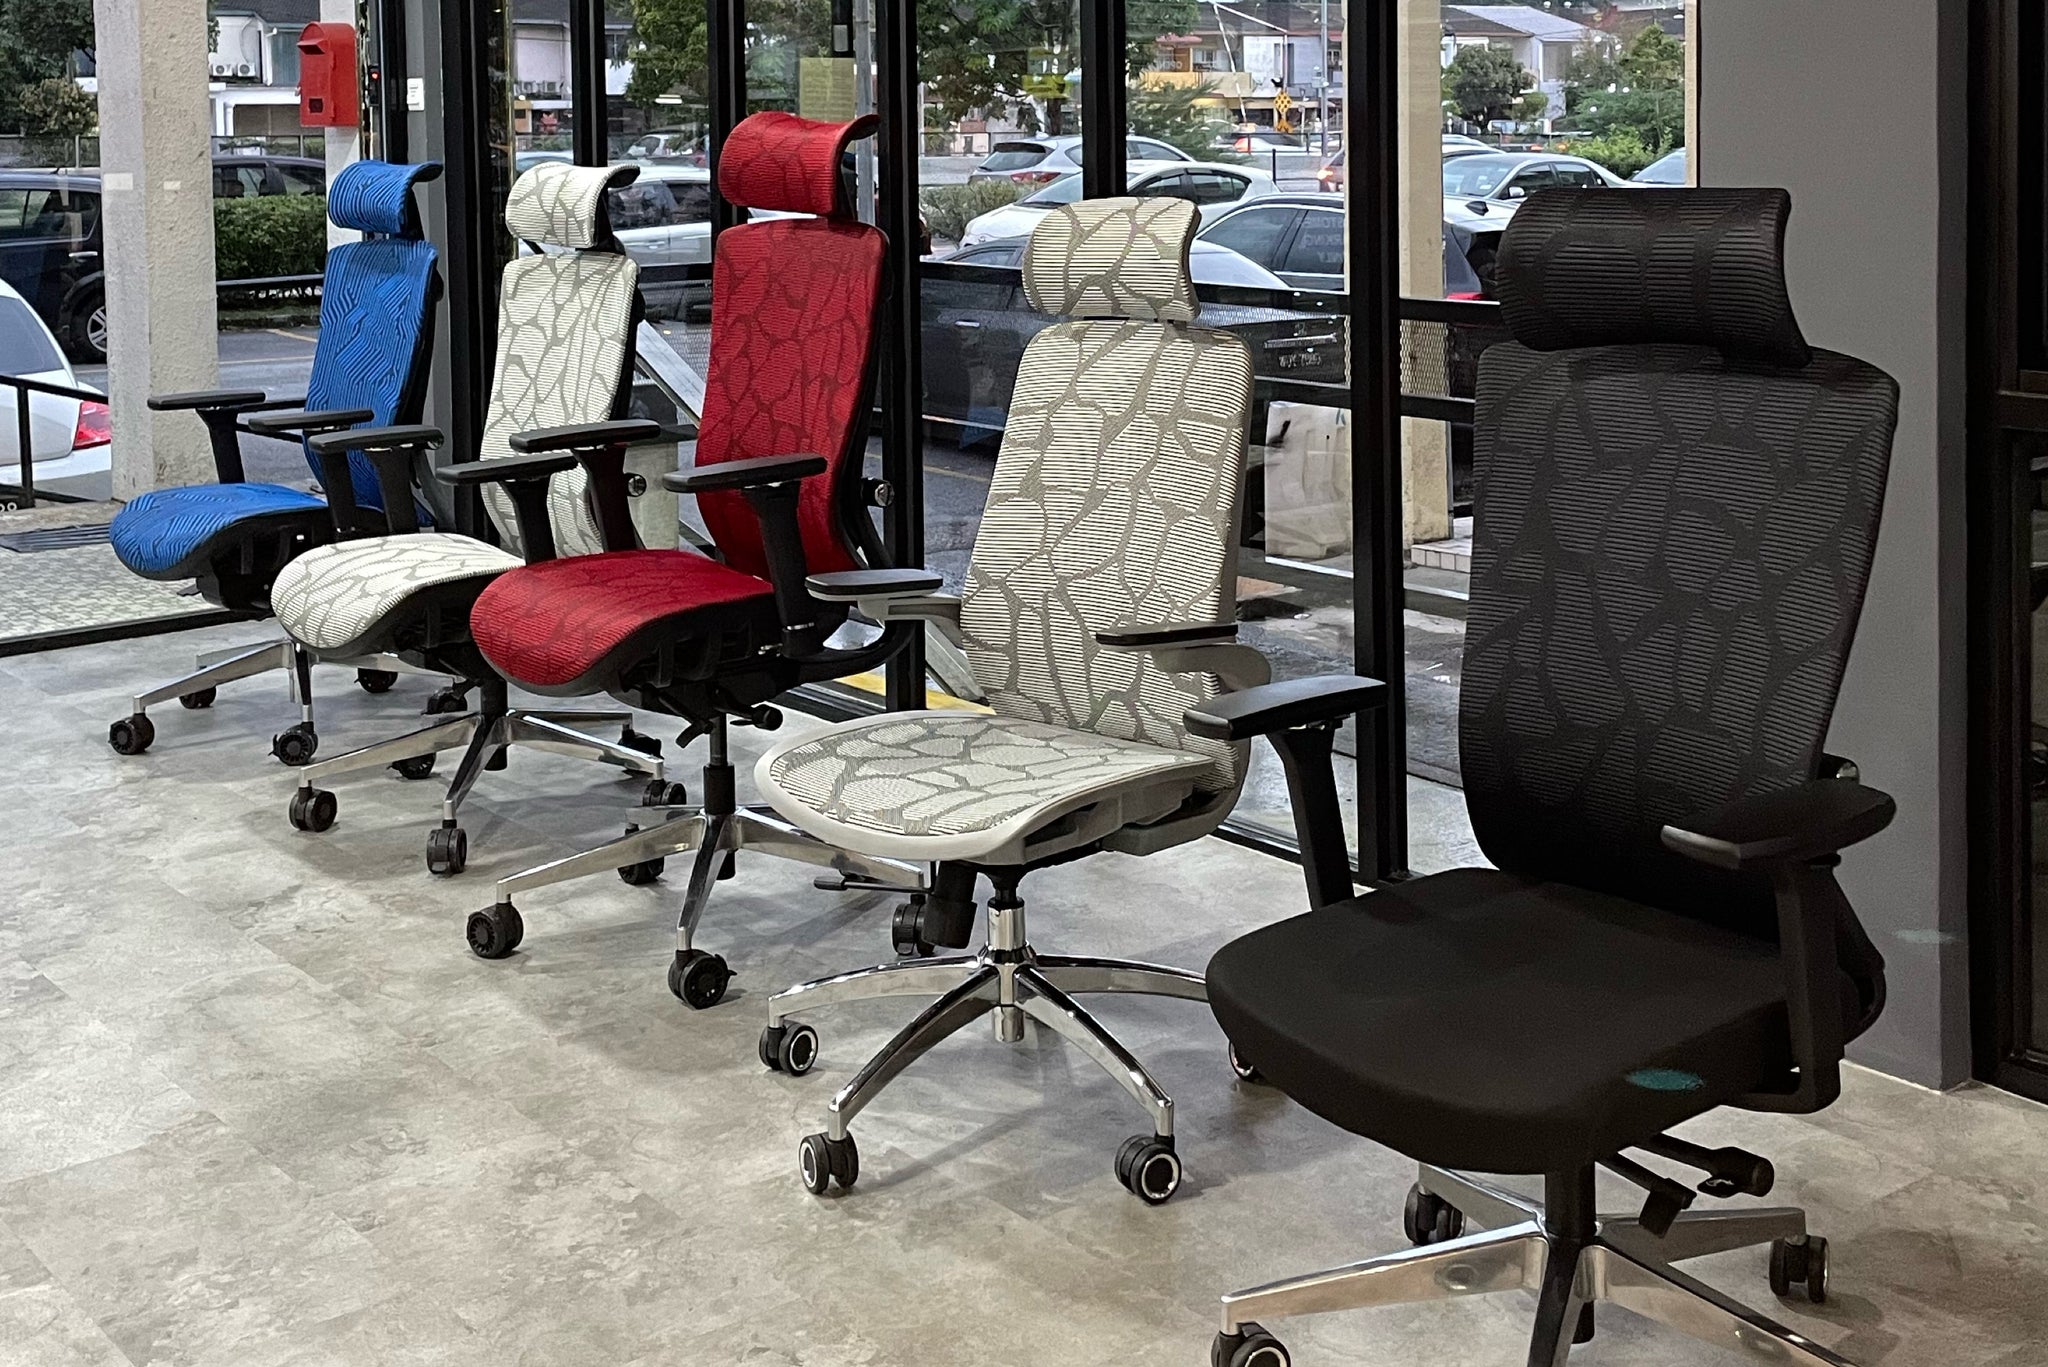 Choosing the best ergonomic chair for you